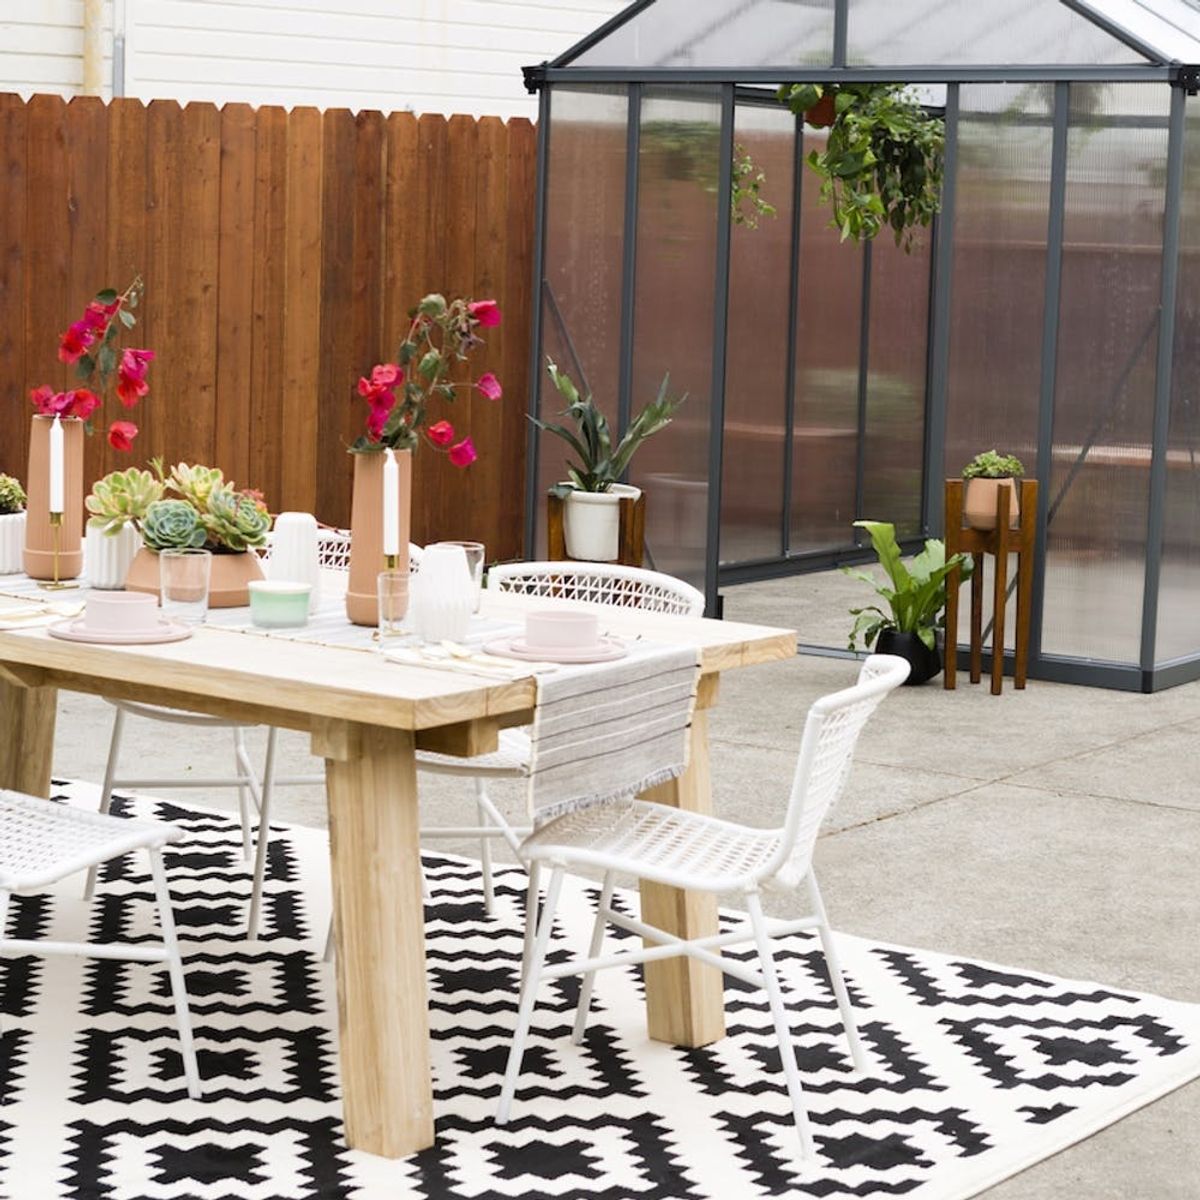 This Millennial Pink-Inspired Backyard Makeover Is What Outdoor Living Is All About